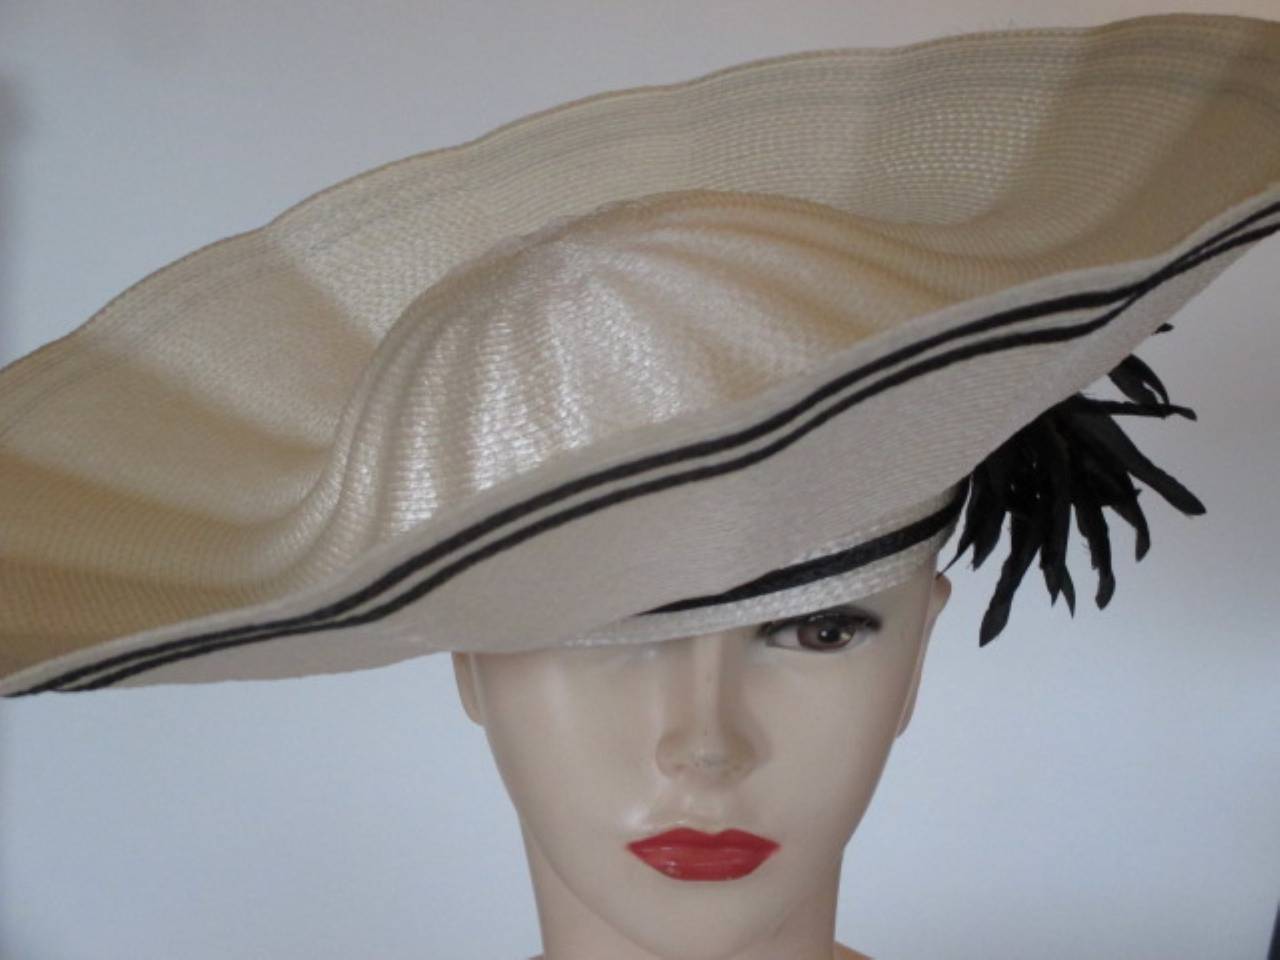 Very rare French style creme/blue straw hat, nice to wear on party's, Ascot or at the beach.